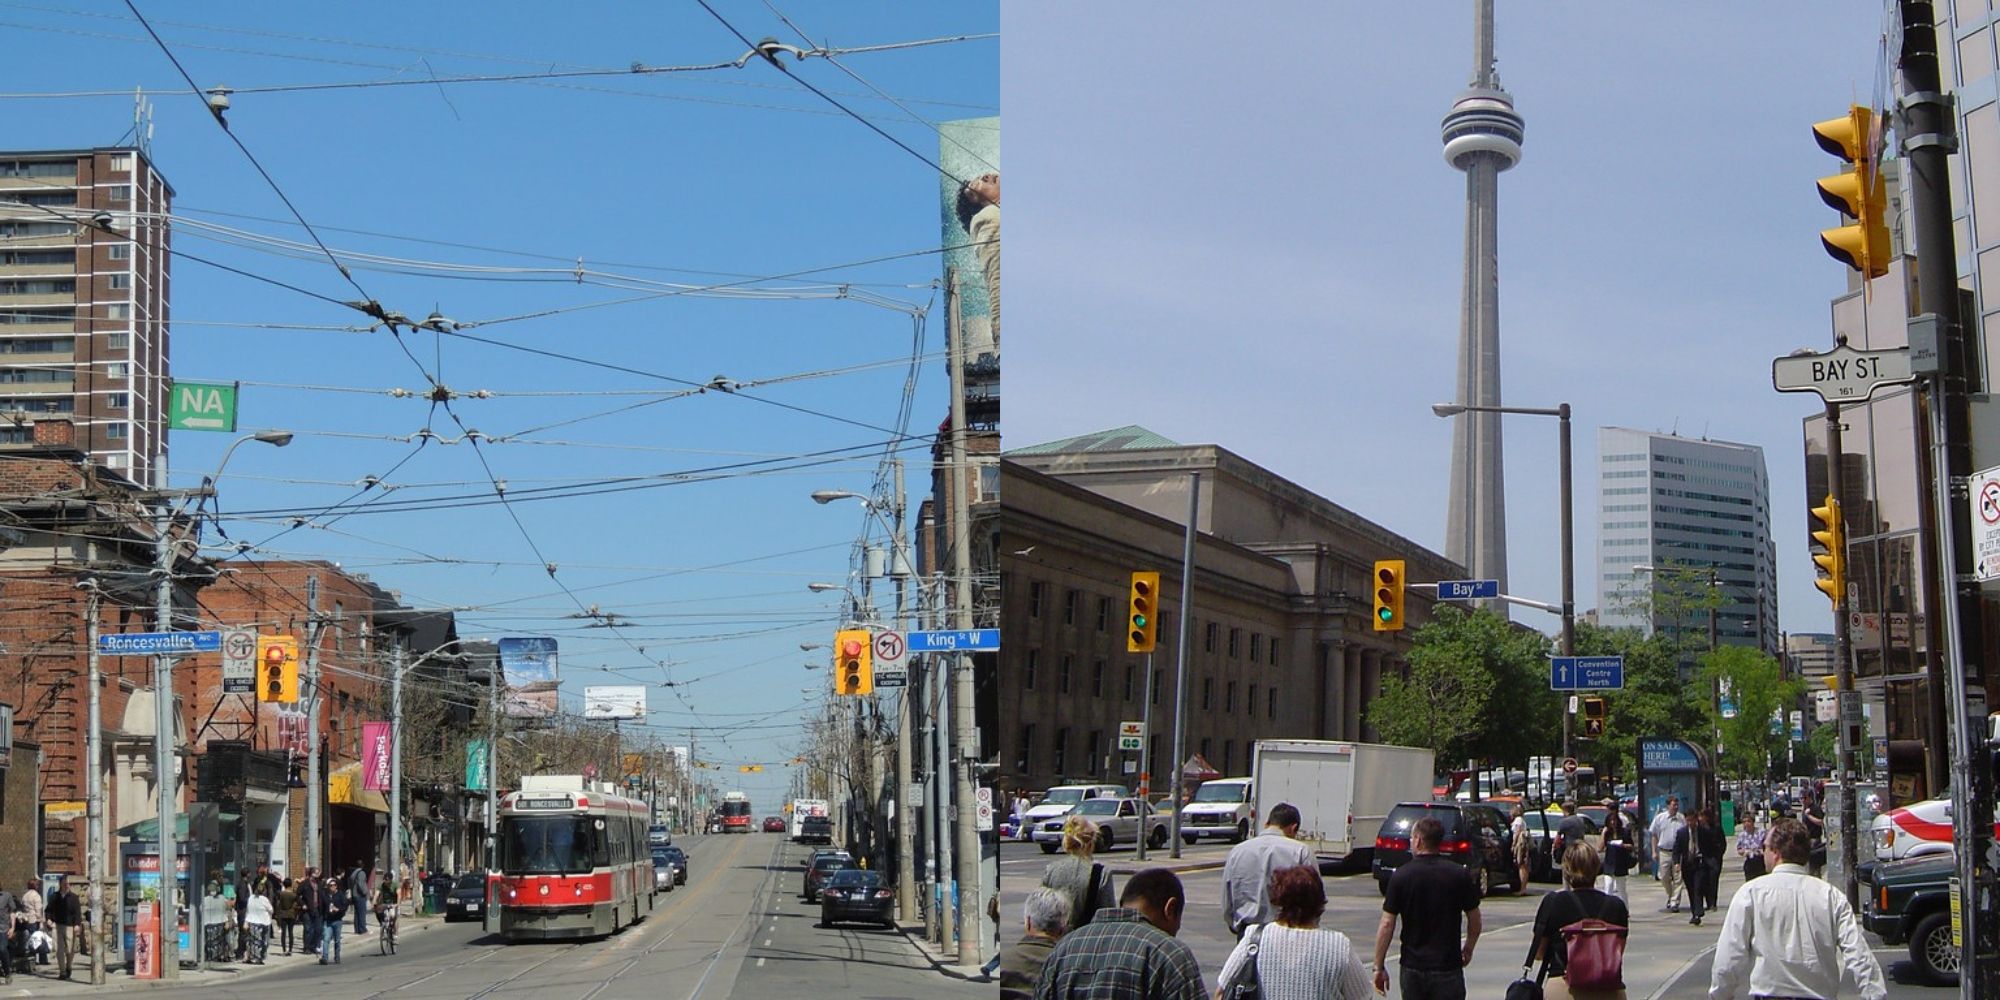 city street in toronto with streetcar and cn tower and crowd downtown toronto